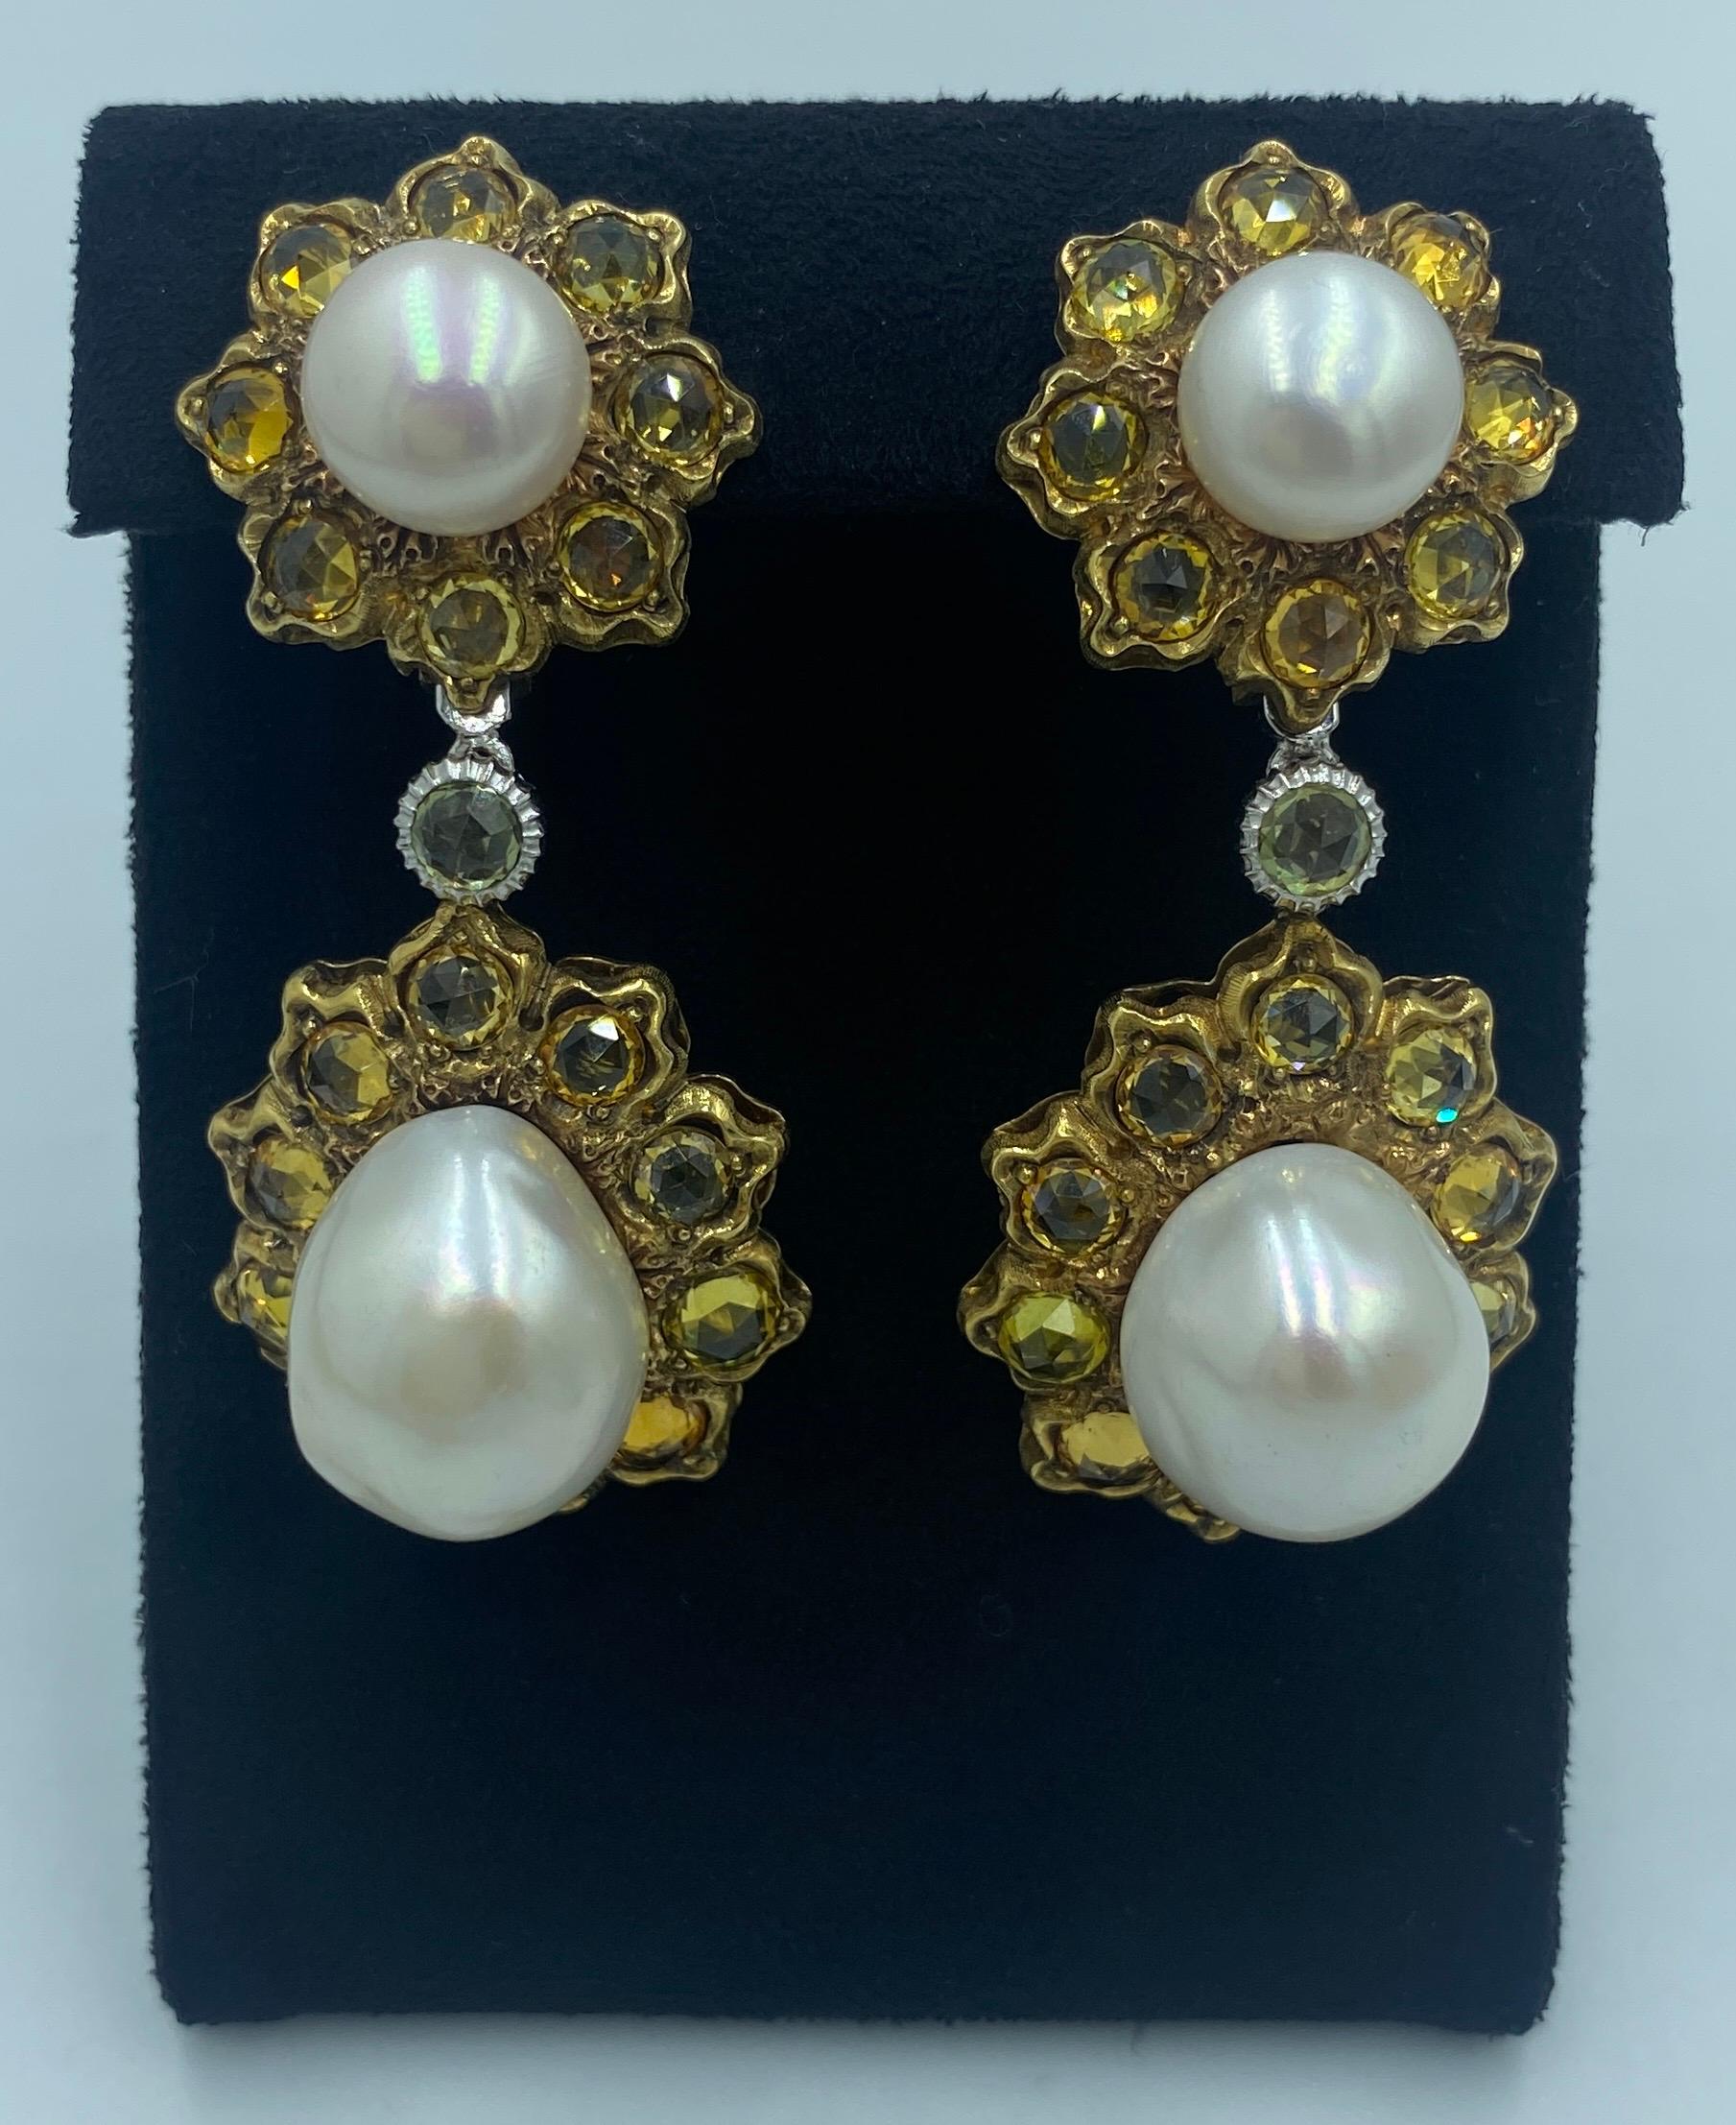 These stunning 18 carat gold earrings designed by Gianmaria Buccellati in 1980s consist of 2 floral links. each flower has a large pearl in its centre and various shades of yellow sapphires as its petals. The 2 flowers on each earring are linked